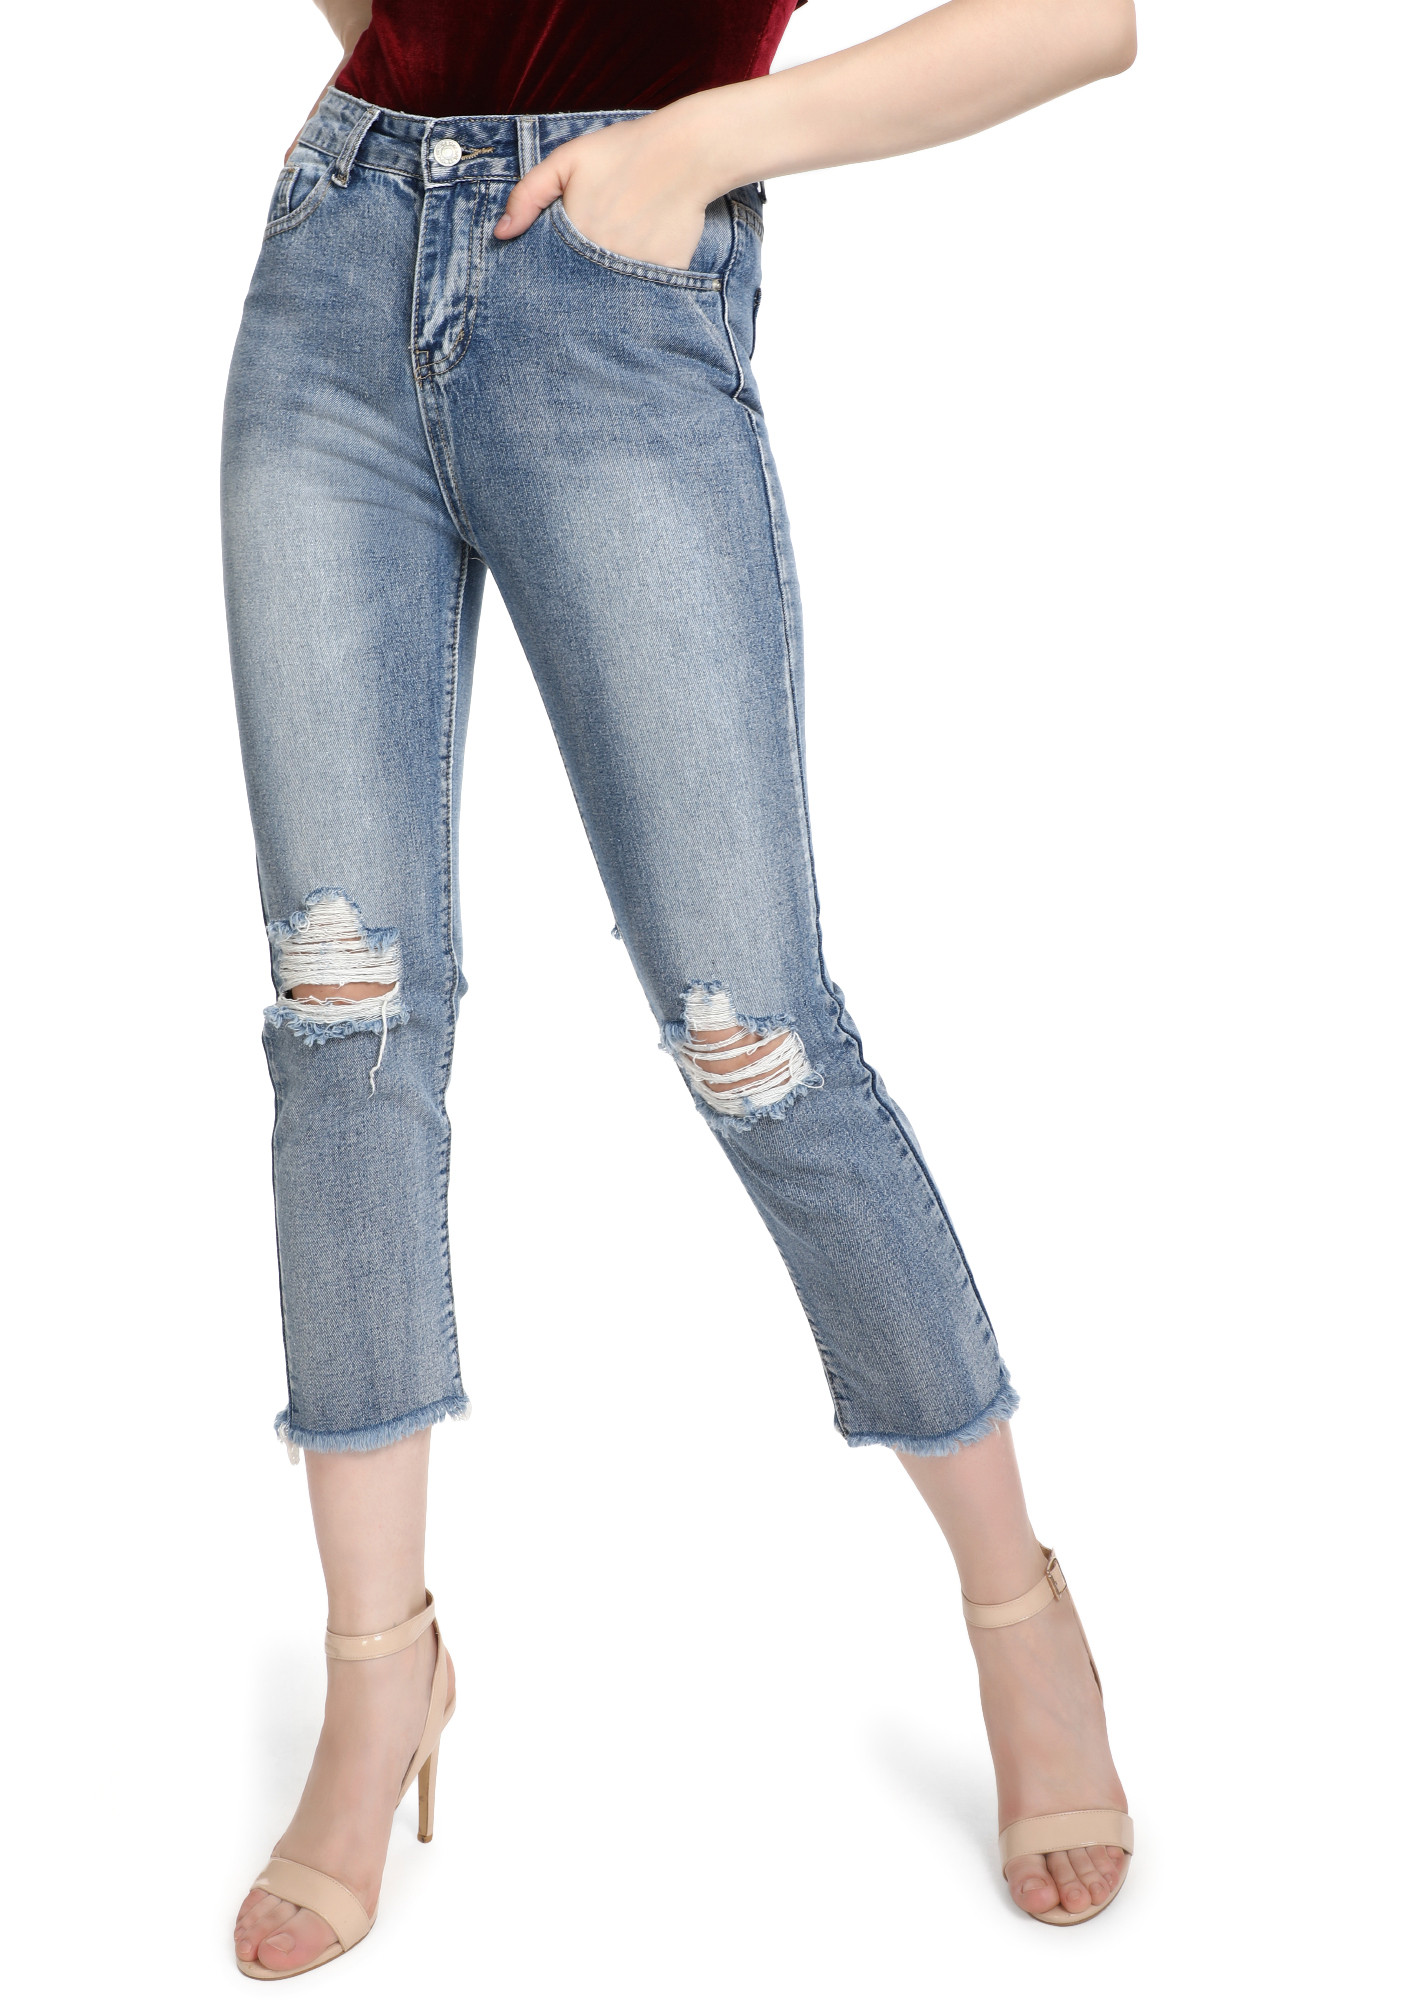 NEW BEGINIGS LIGHT BLUE CROPPED JEANS